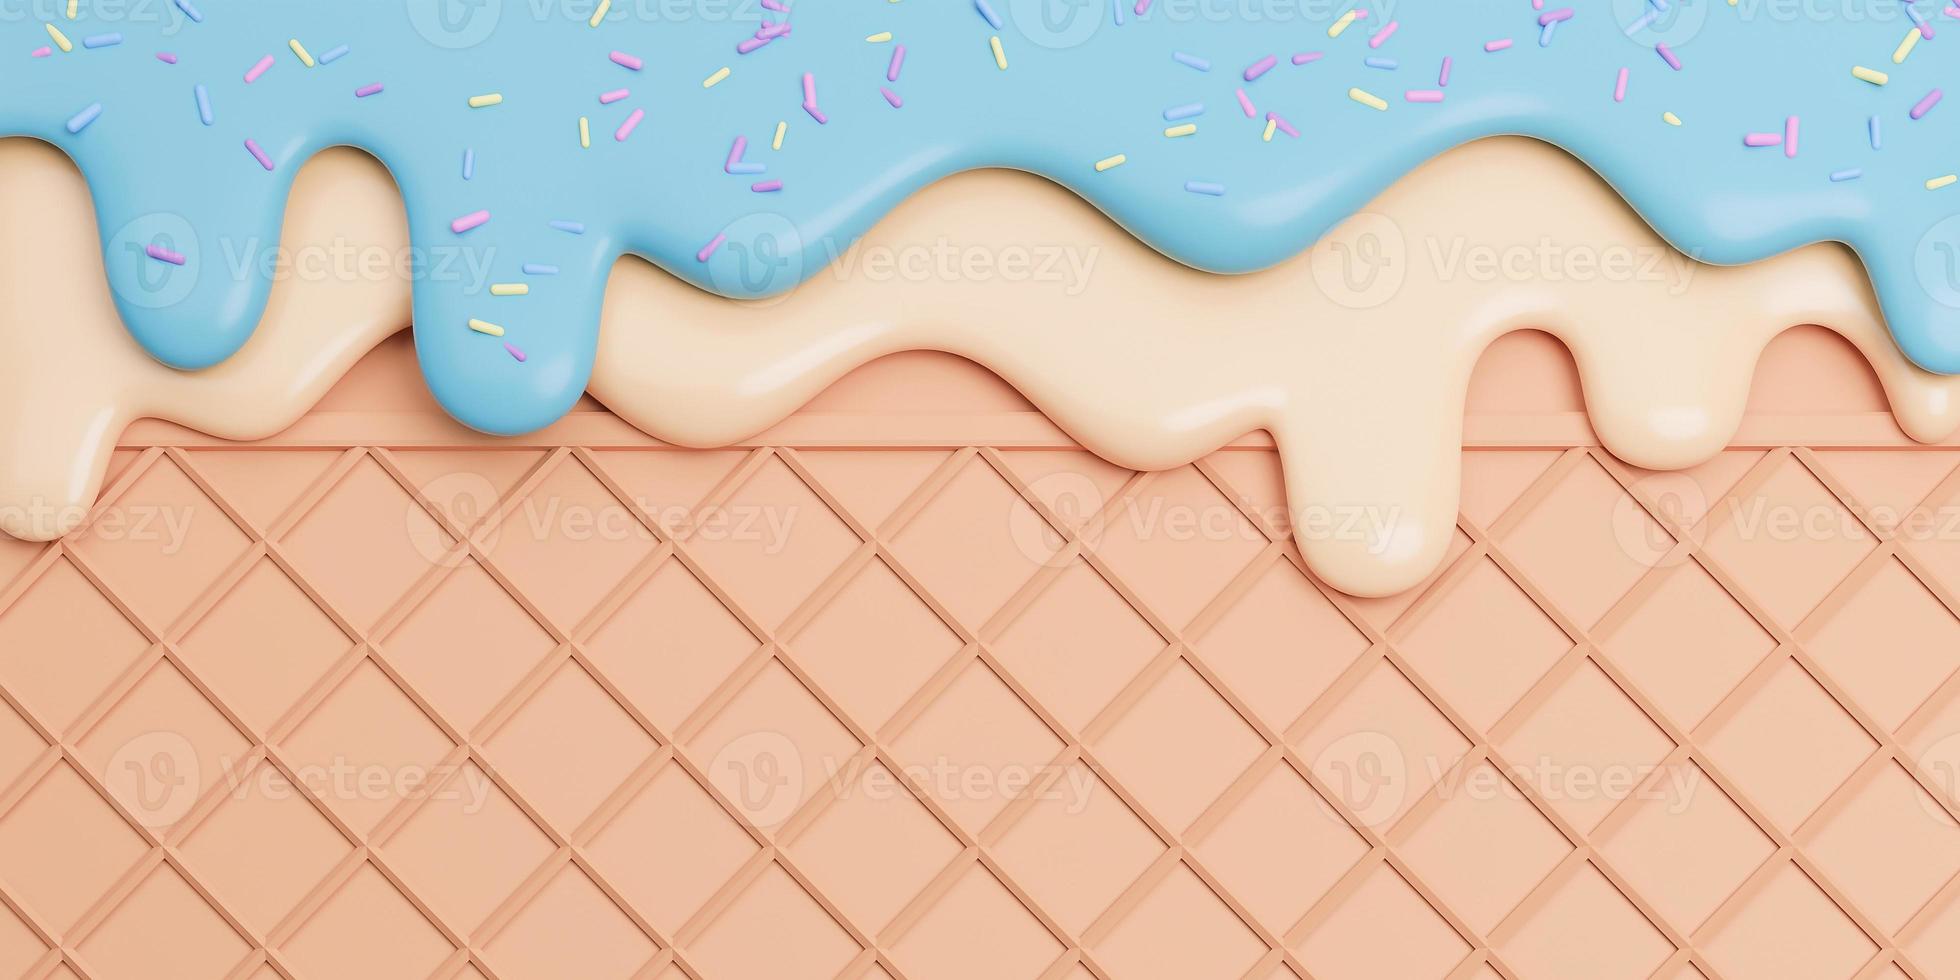 Mint and Vanilla Ice Cream Melted with Sprinkles on Wafer banner Background with copy space.,3d model and illustration. photo